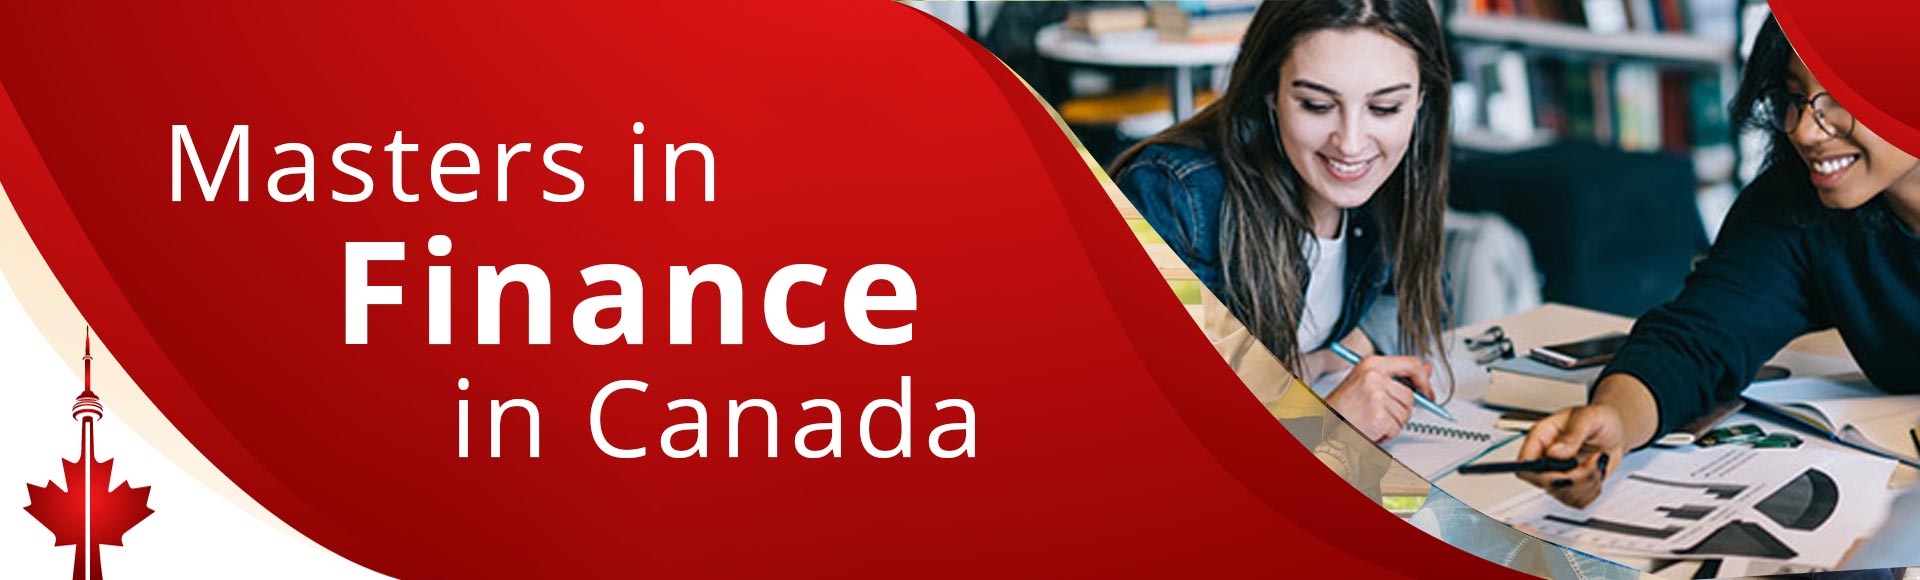 Masters in Finance in Canada